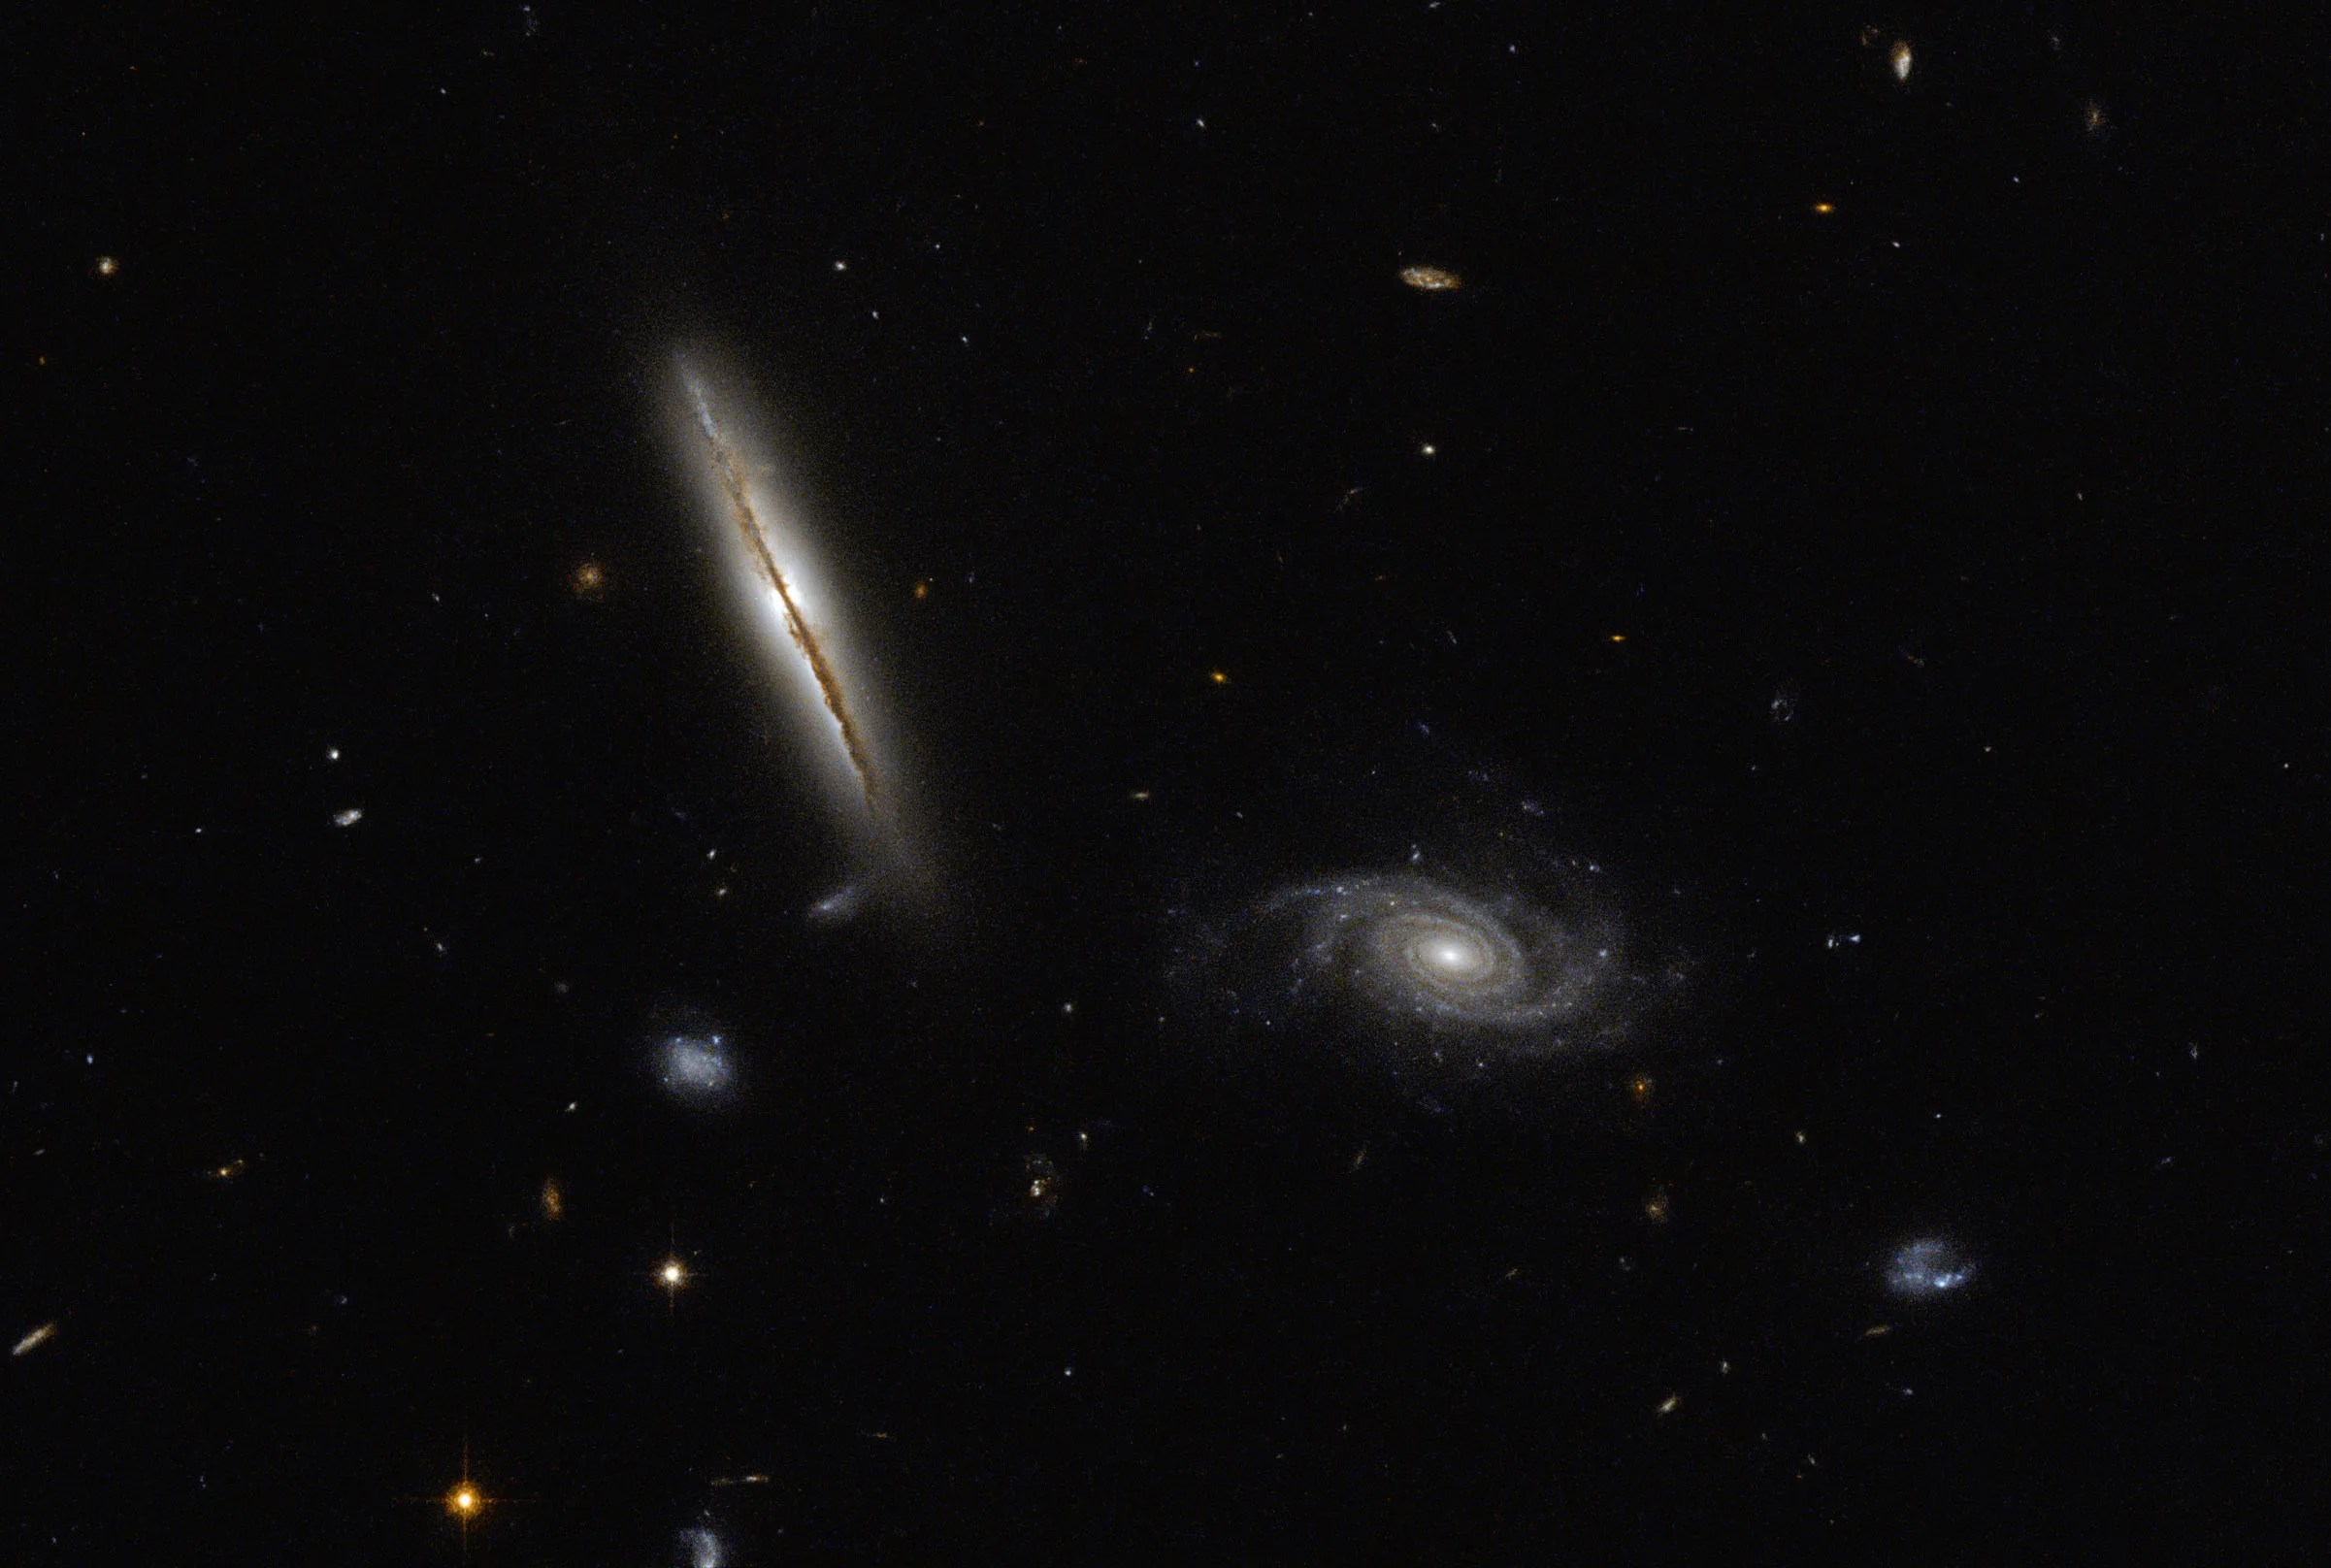 Hubble space telescope image of spiral galaxies lo95 0313-192 (left) and [loy2001] j031549.8-190623.